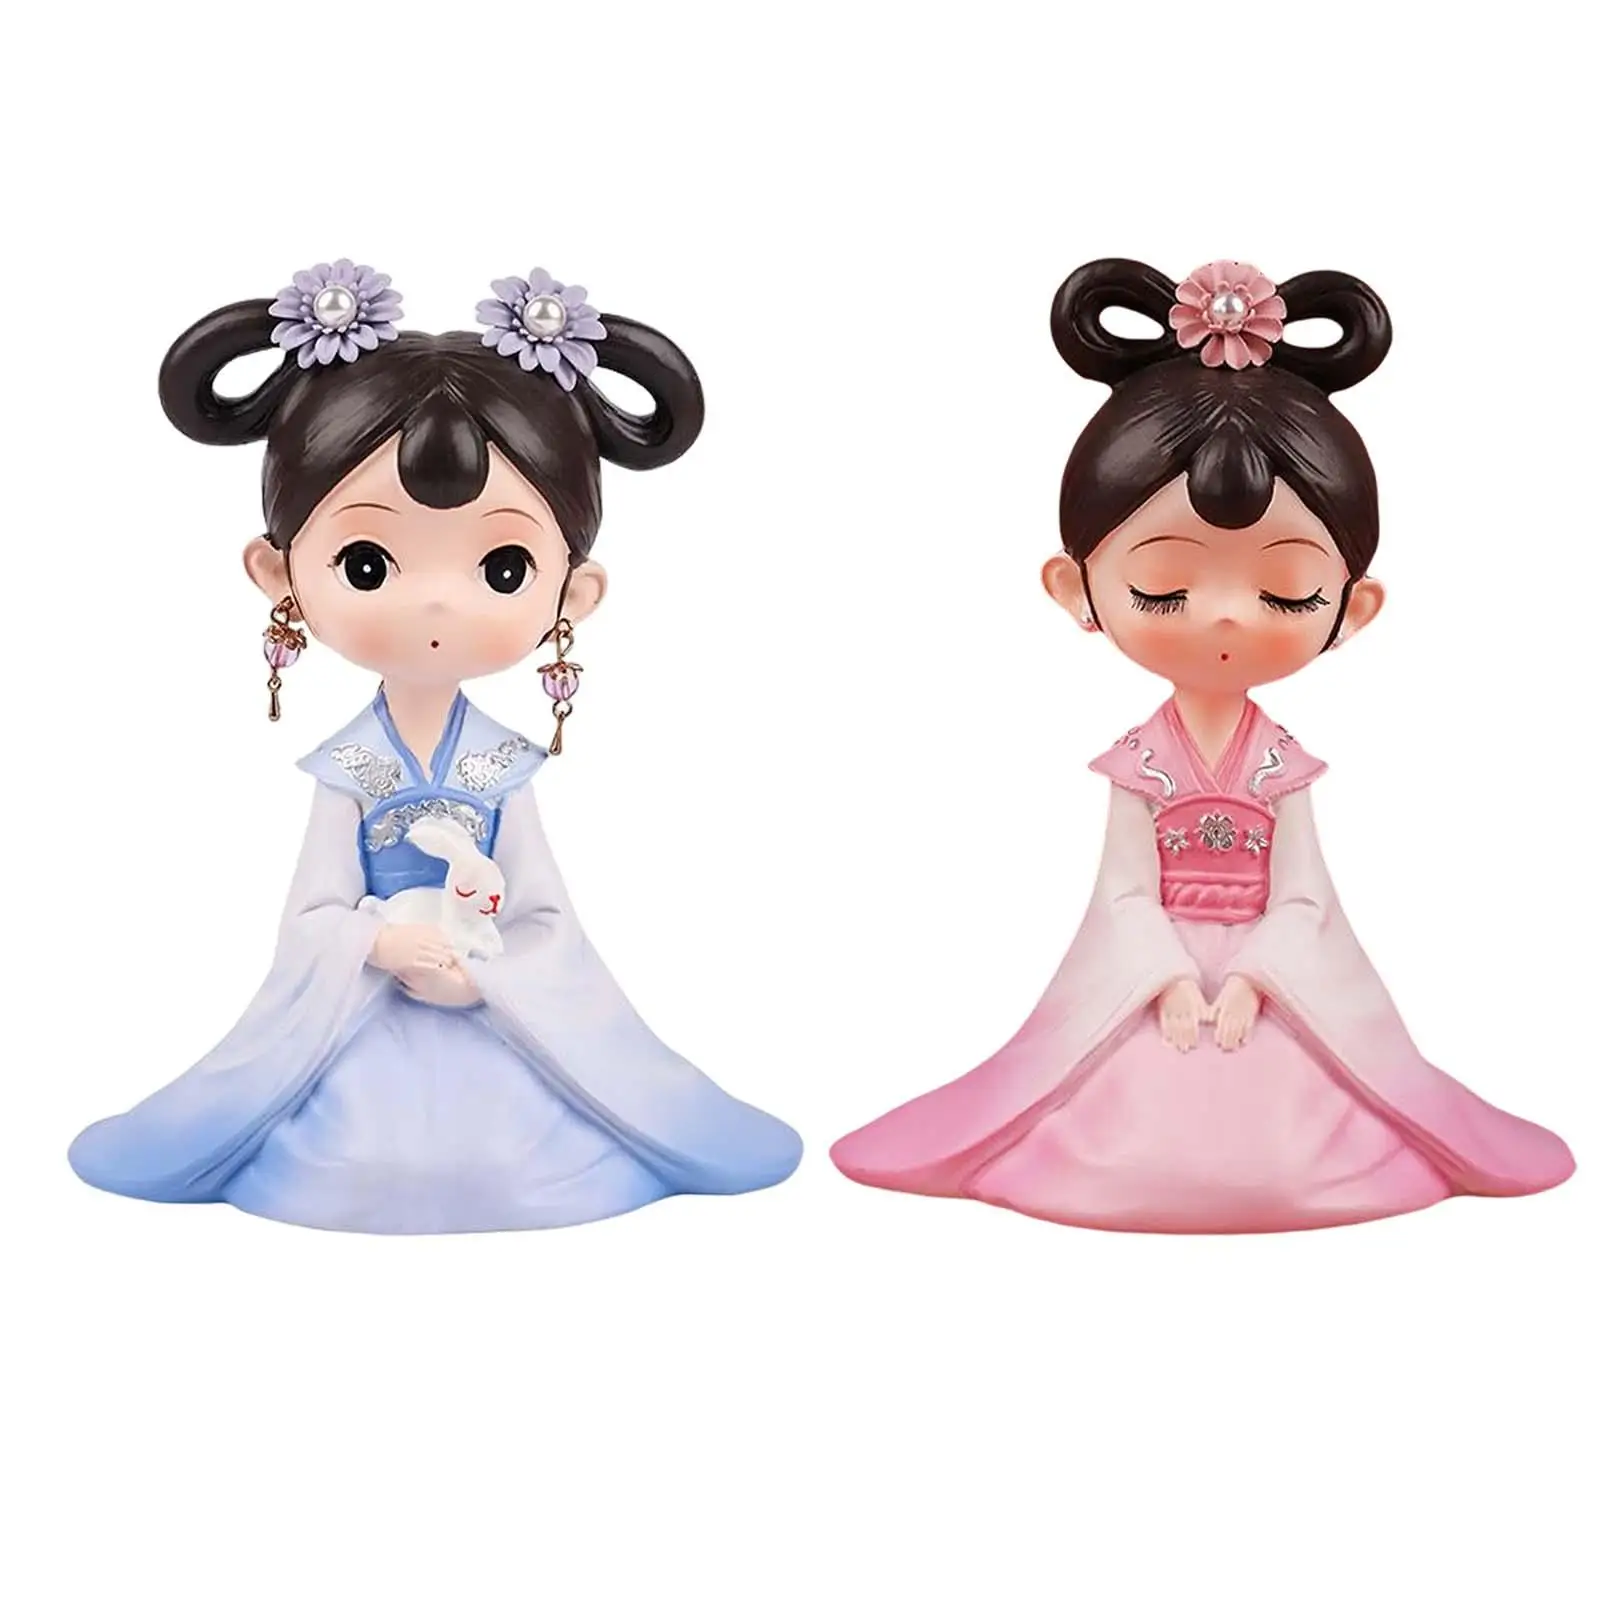 Chinese Ancient Girl Doll Hanfu Girl Statue Resin Collectible Figurine Decoration Ornaments for Home, Bedroom, Bar Ornament